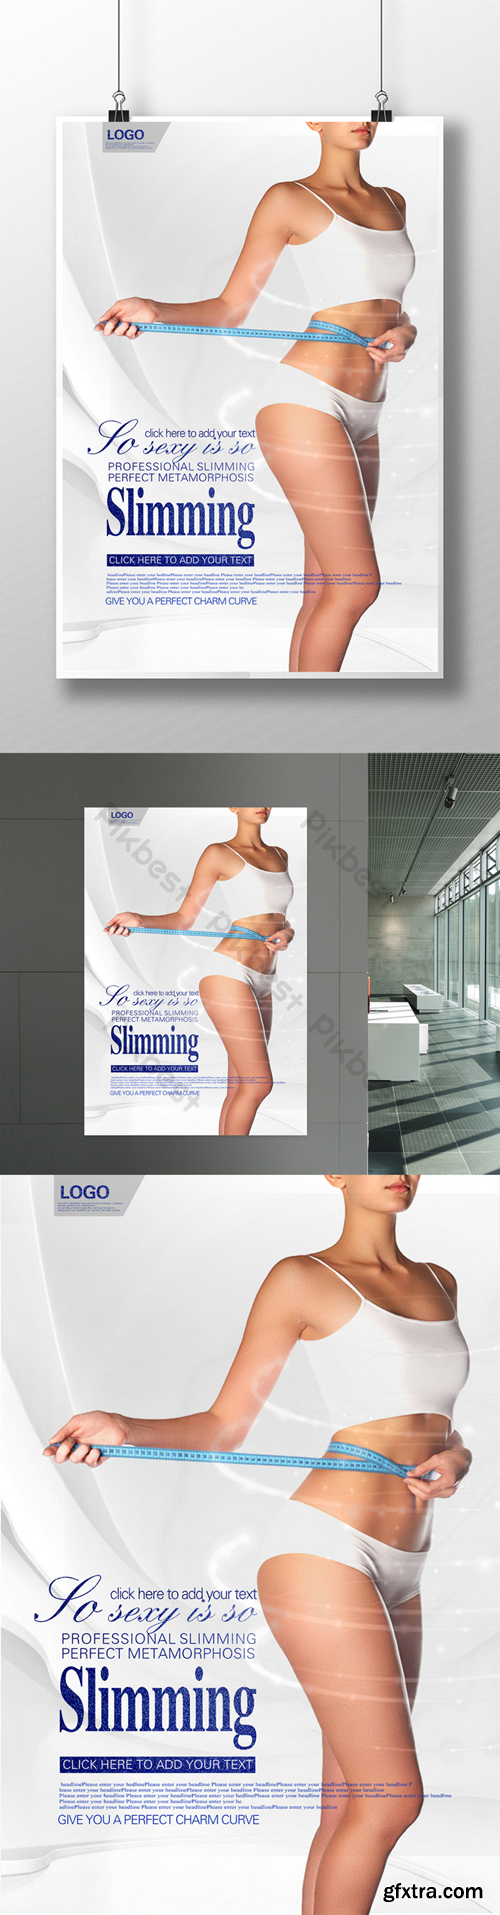 Weight loss bodybuilding poster Template PSD